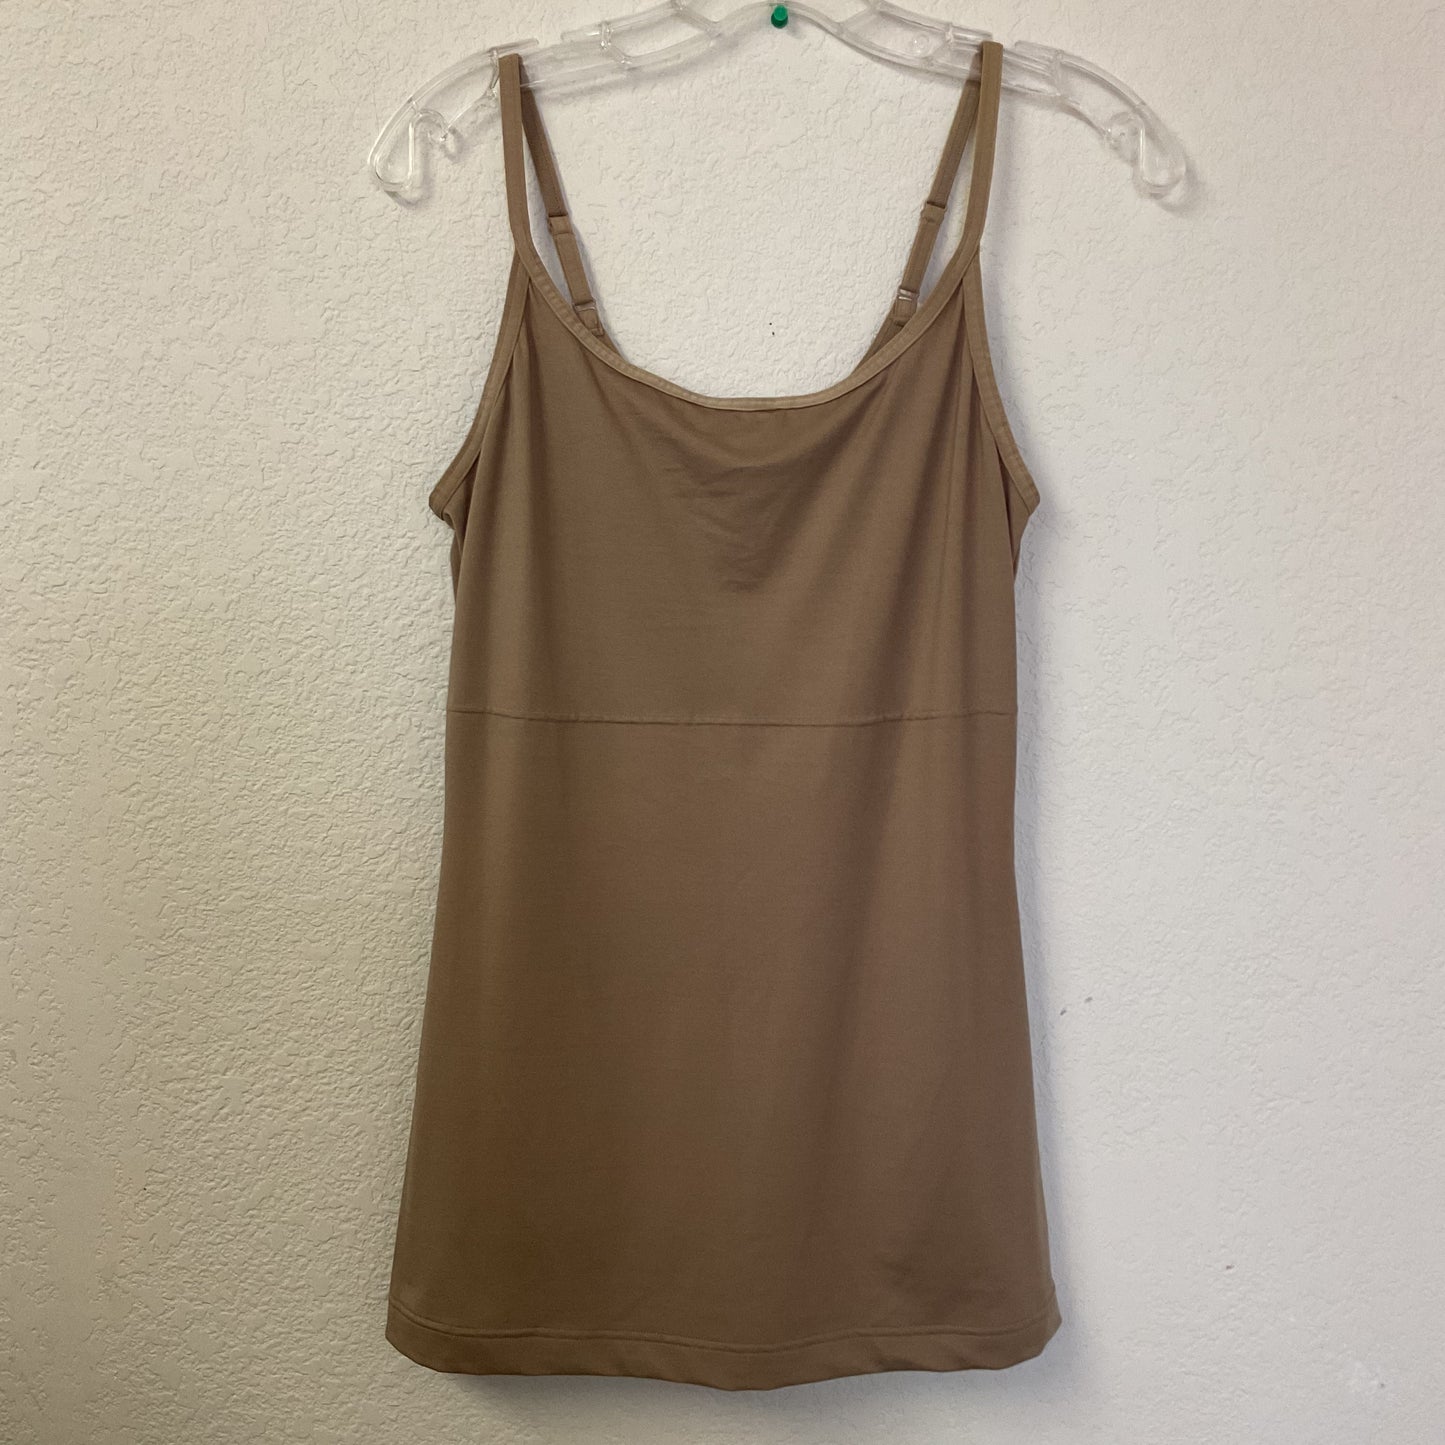 Sweet Nothings Maiden Form Women’s Camisole Size 2XL.